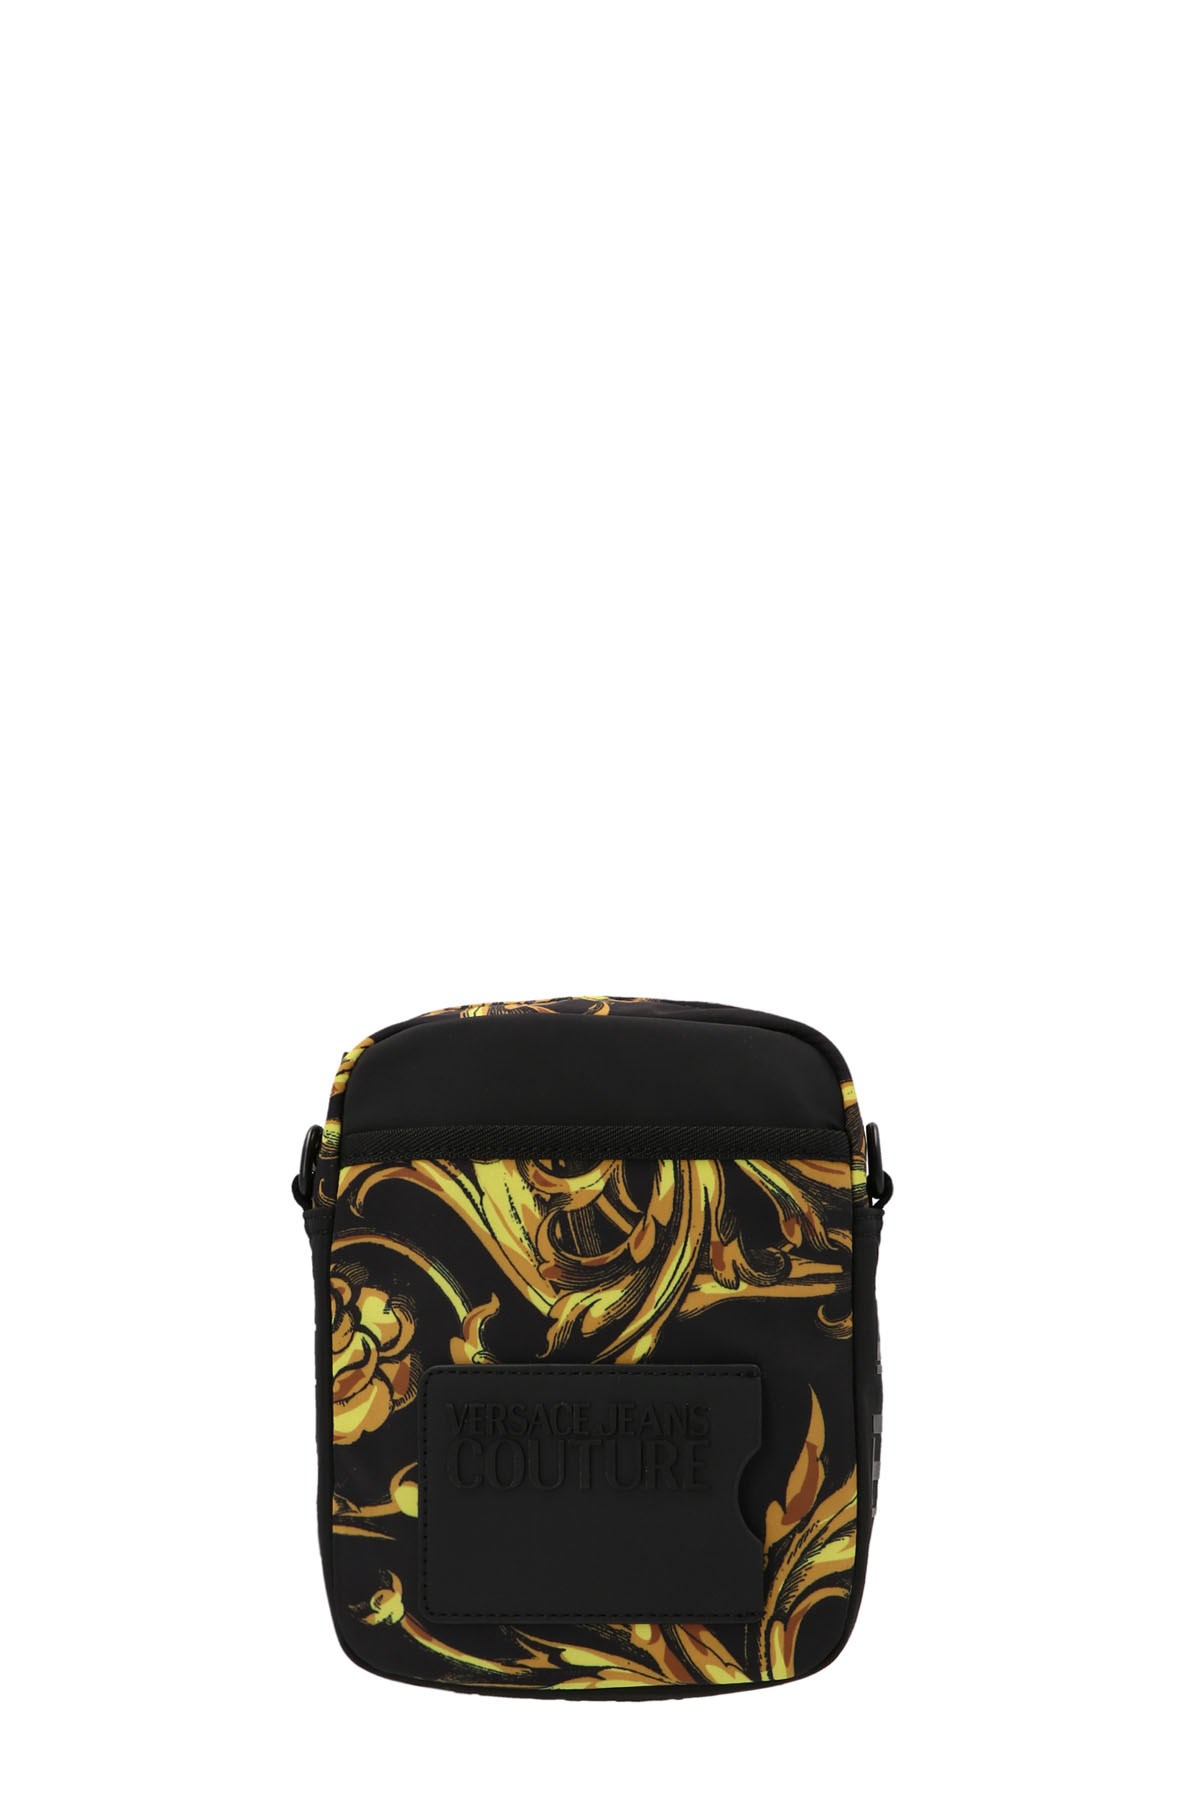 VERSACE JEANS COUTURE Barocco Print Crossbody Bag